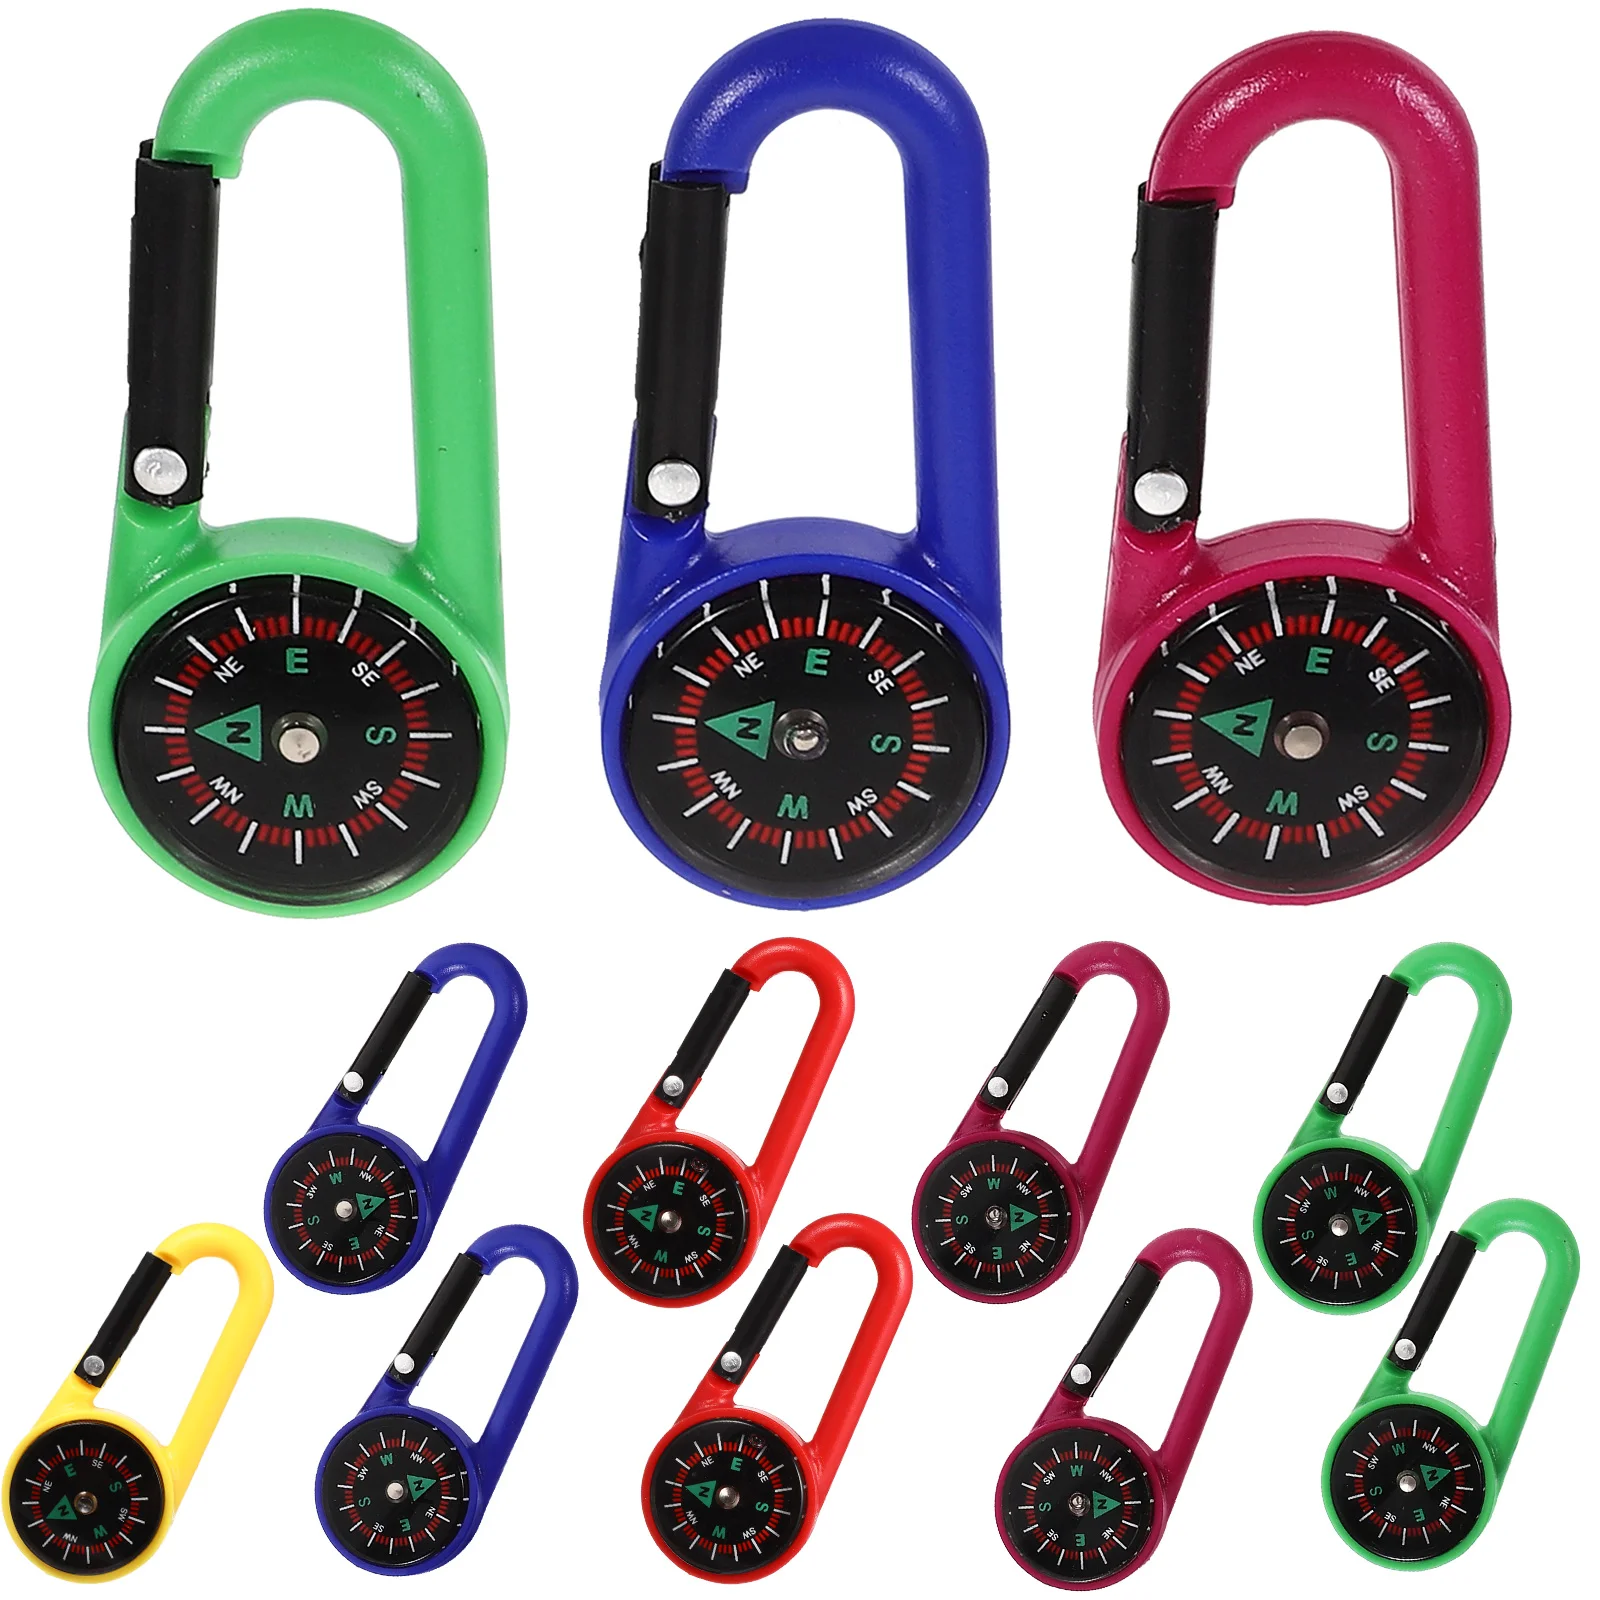 

12pcs Carabiner Compasses for Kids Compass Belt Clips Outdoor Camping School Prizes Party Favor ( Random Colors )